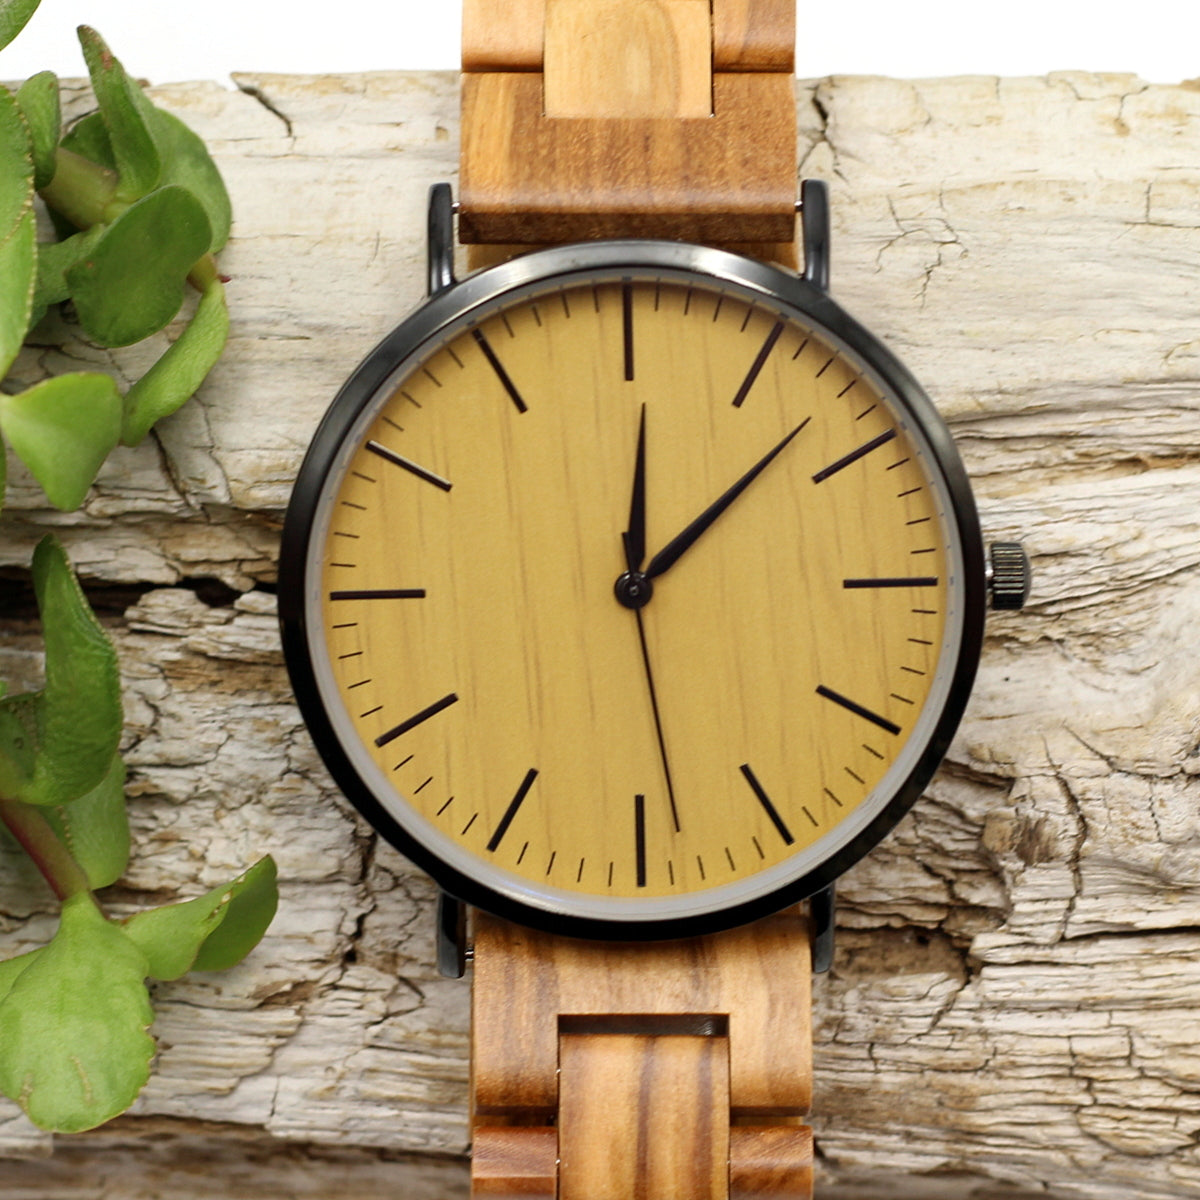 Men's modern stainless steel watch with olive wood face and wooden strap. Thin, lightweight , eco-friendly and uber-trendy. Engrave a message on the back for R80. Shipping anywhere in SA for R59.